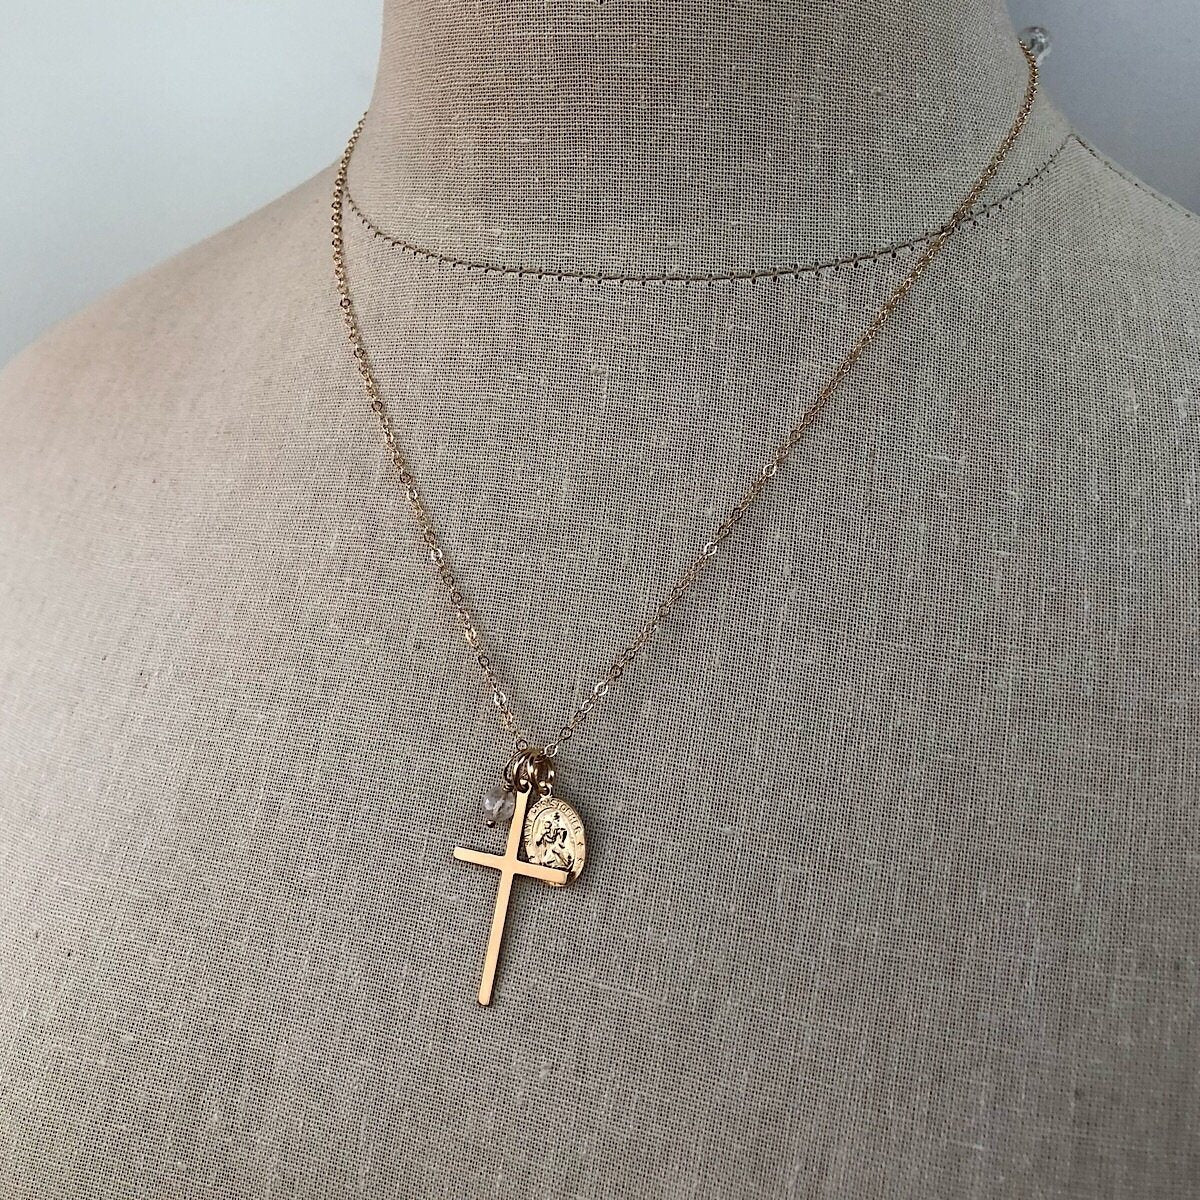 St. Christopher Travelers Charm Necklace  - IsabelleGraceJewelry